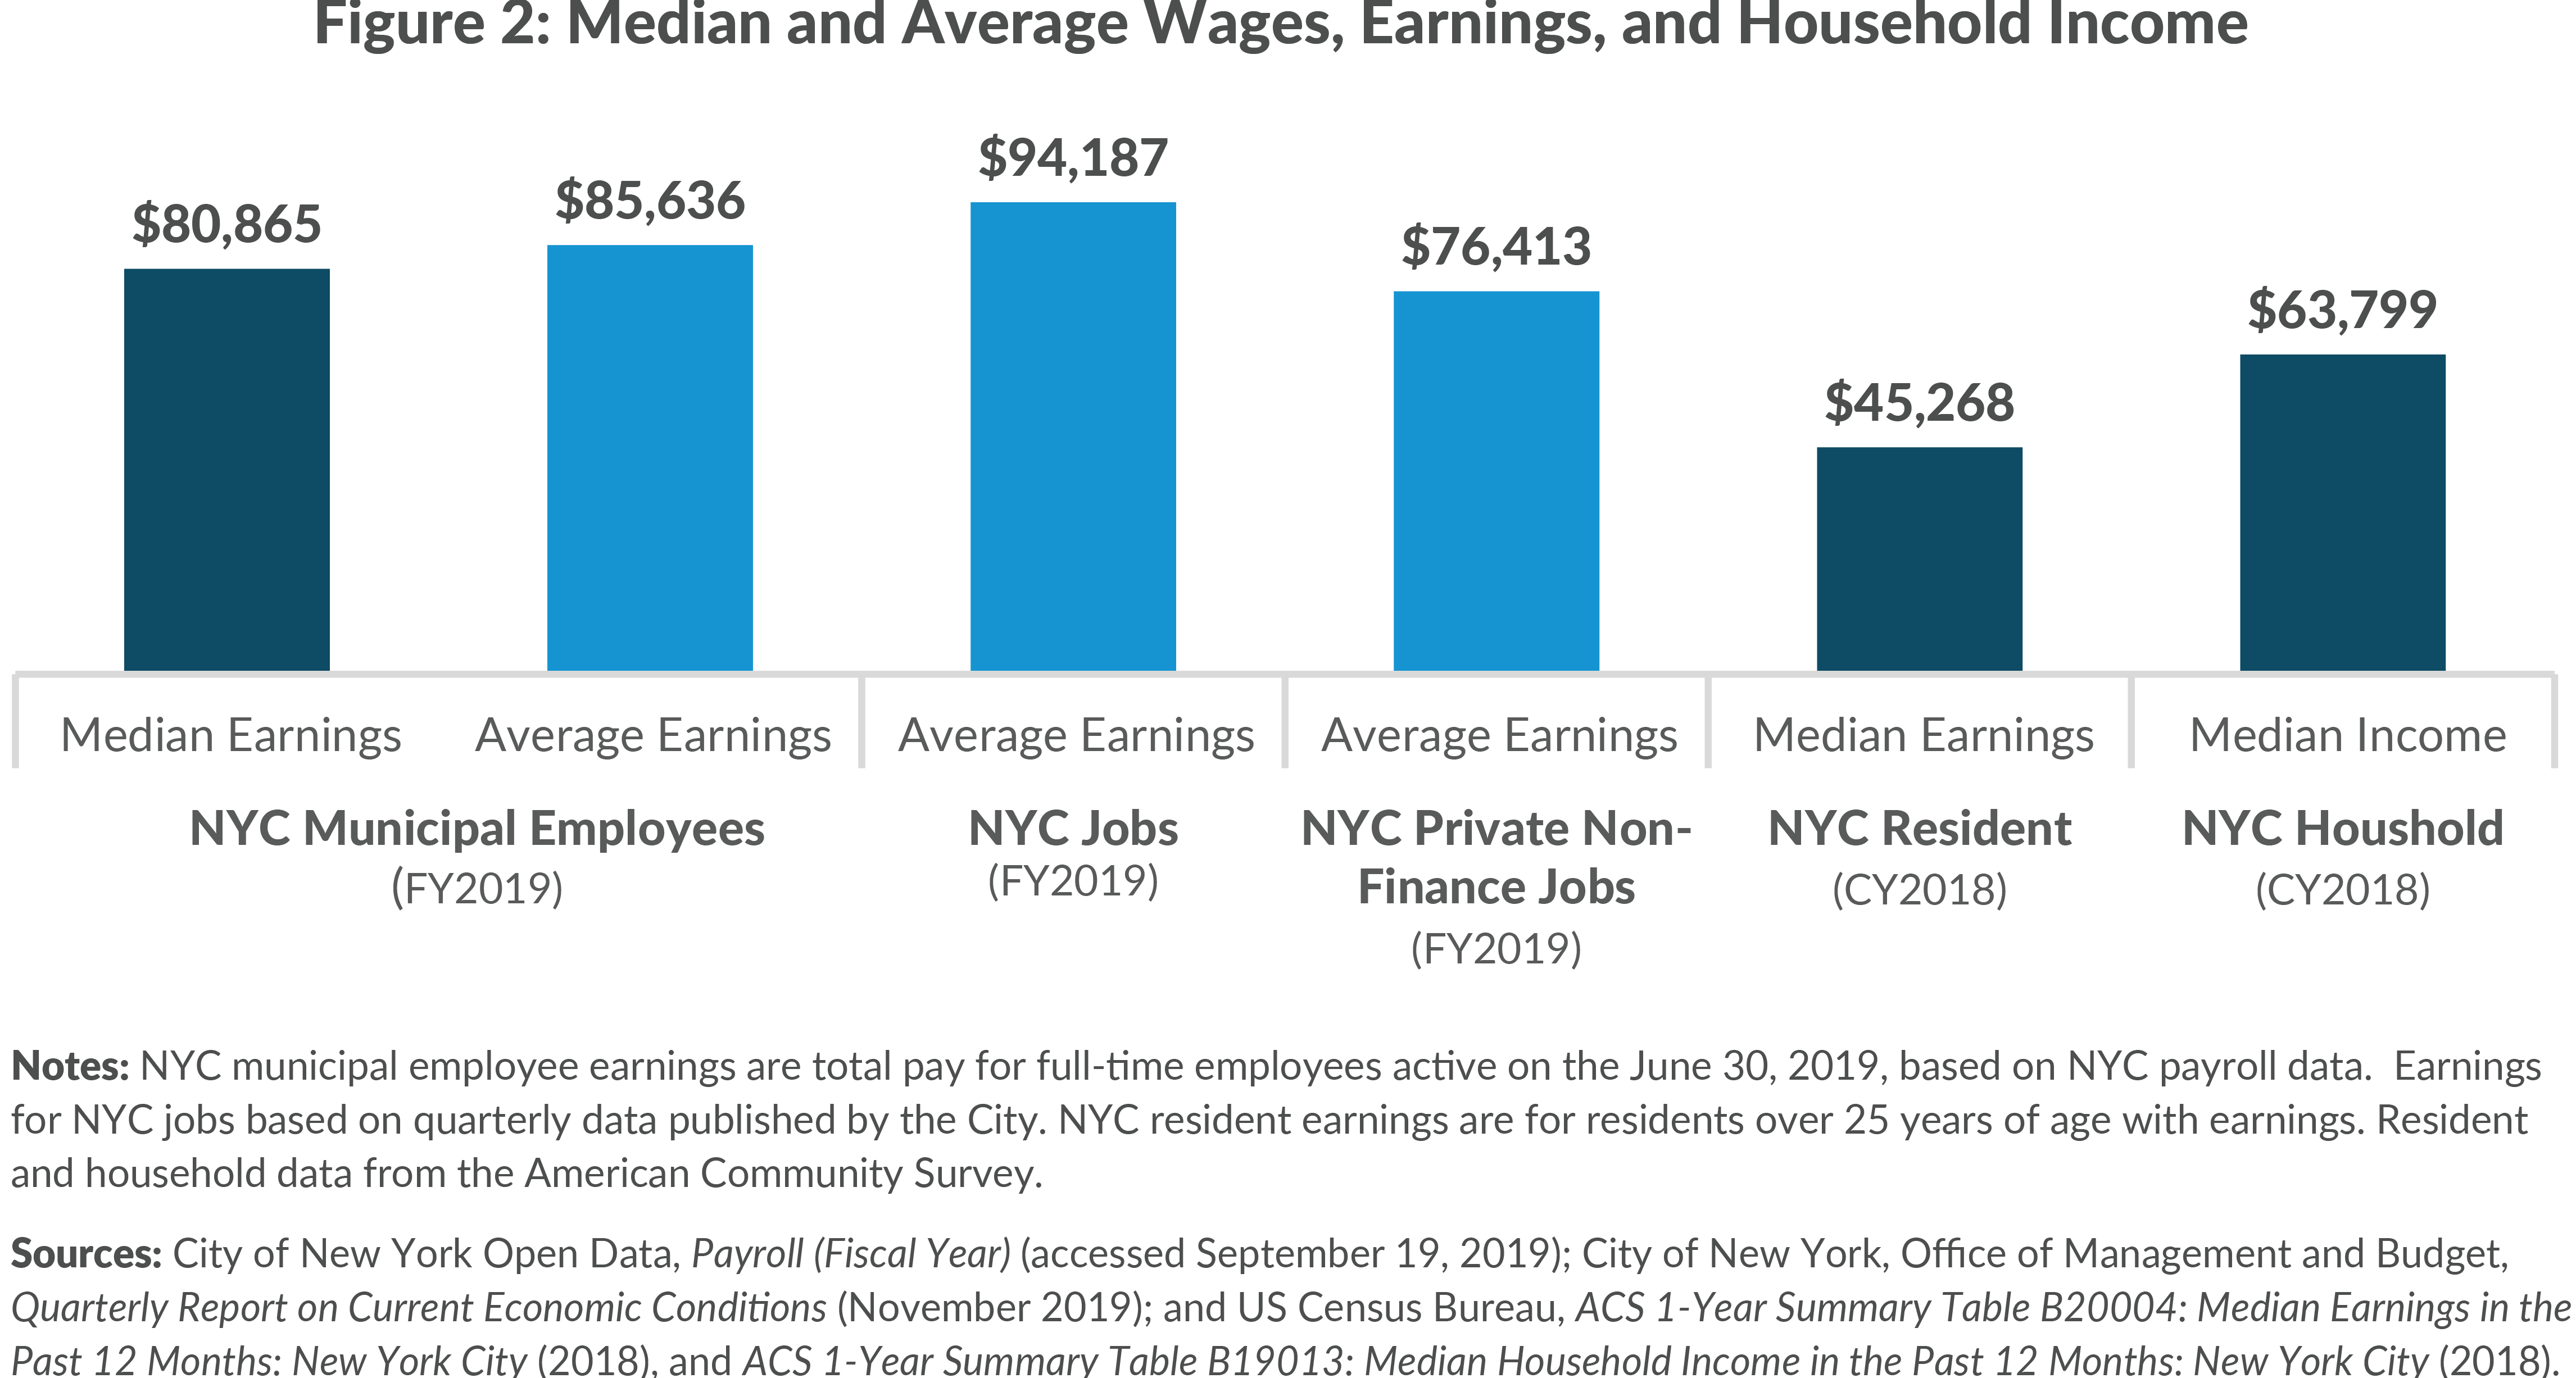 Figure 2: Median and Average Wages, Earnings and Household Income 